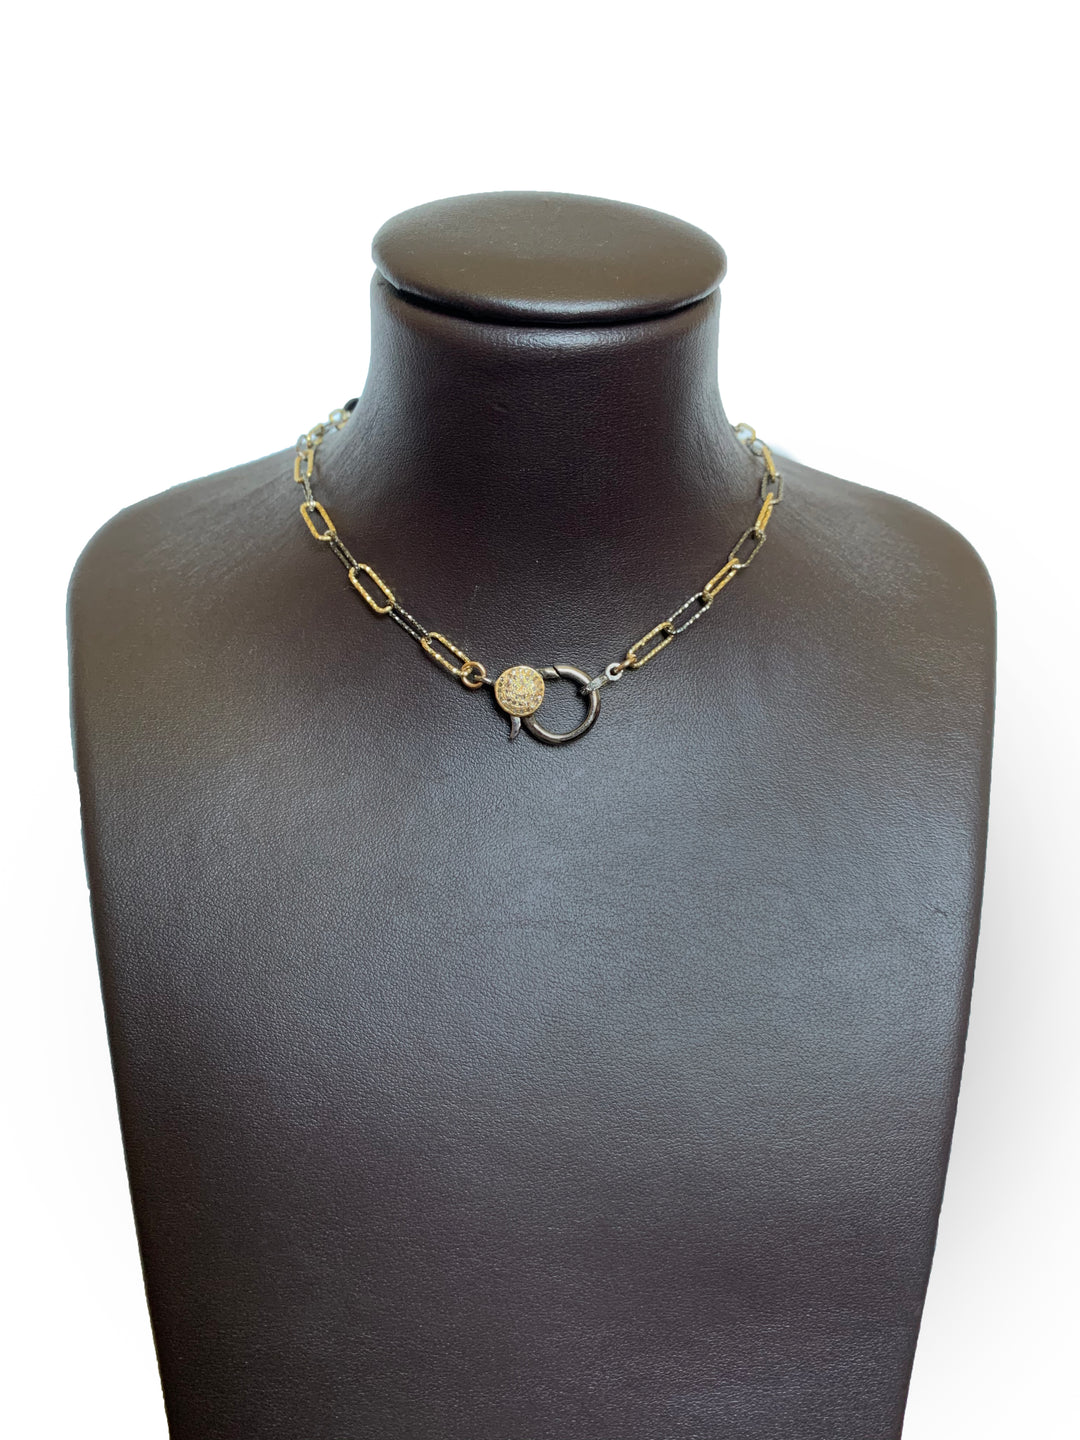 Gold & Silver Chain Necklace - Kingfisher Road - Online Boutique